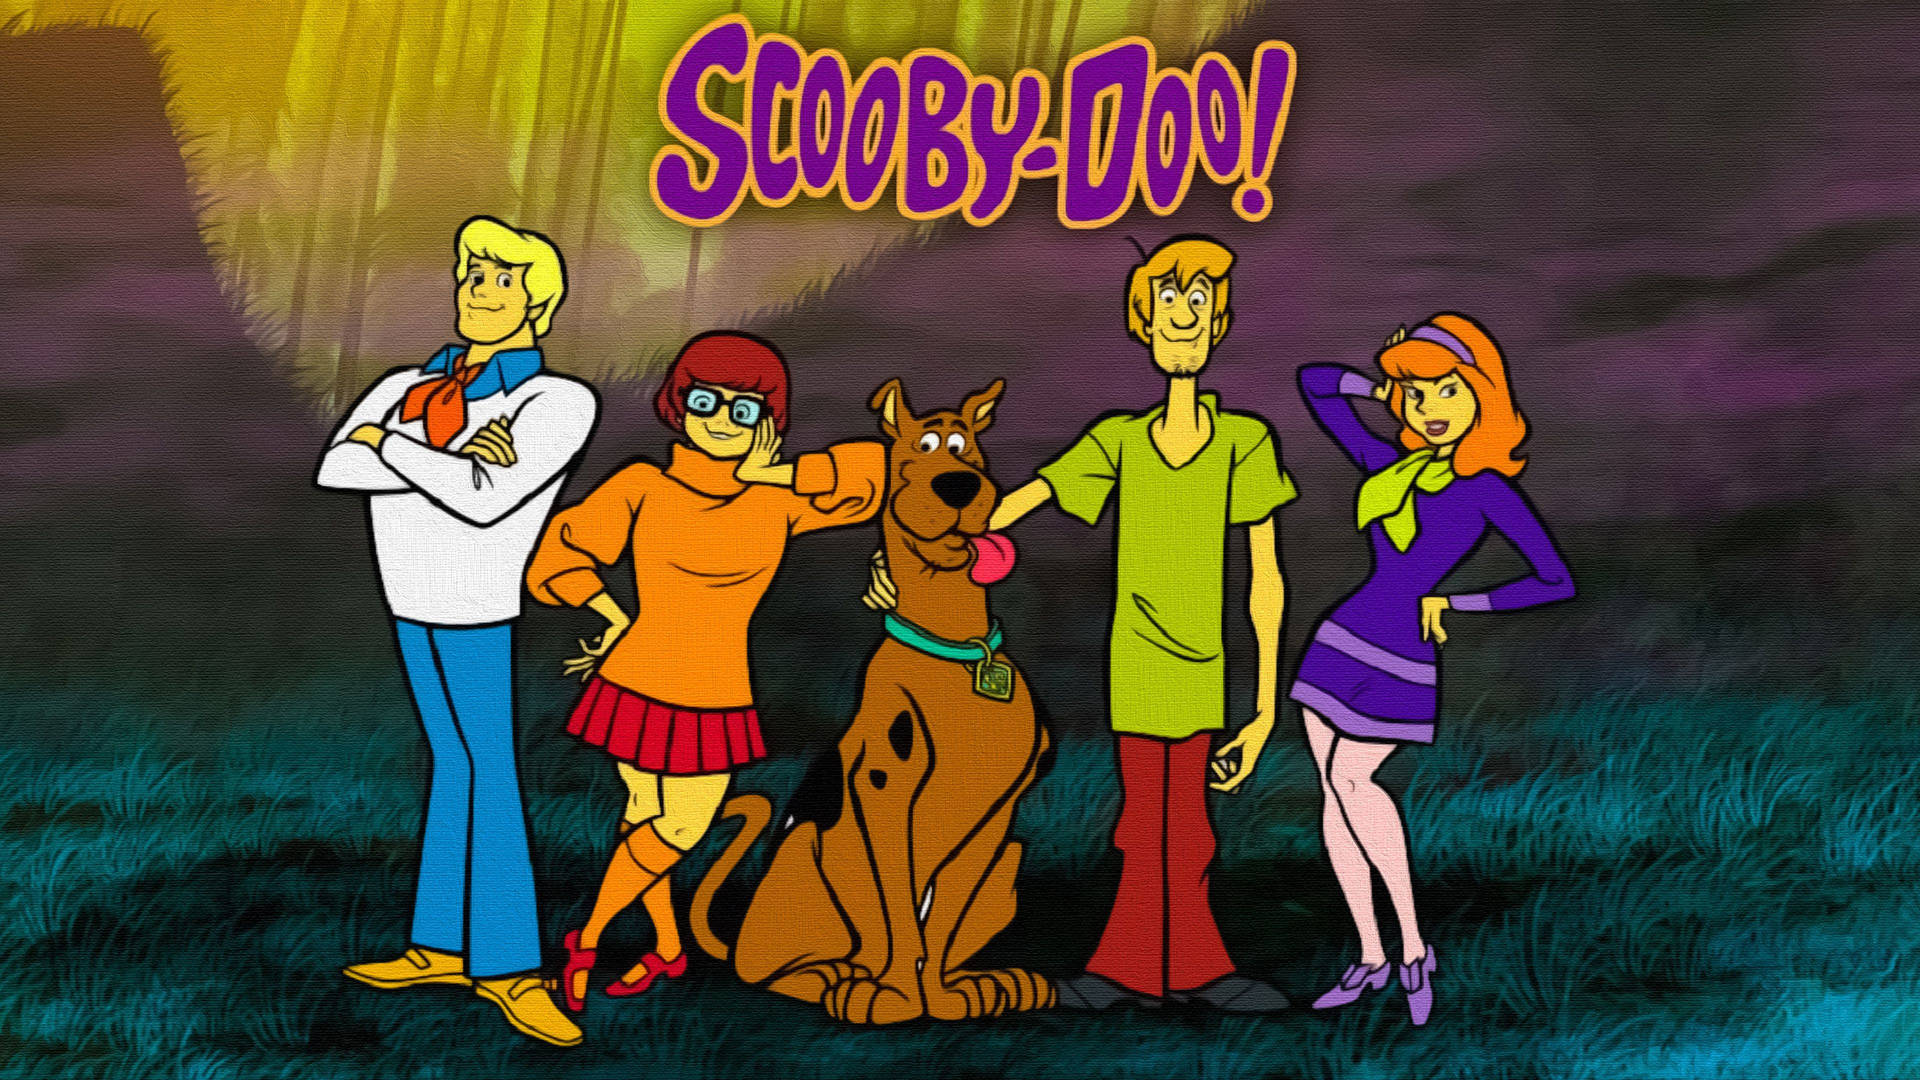 Scooby Doo In The Forest Background